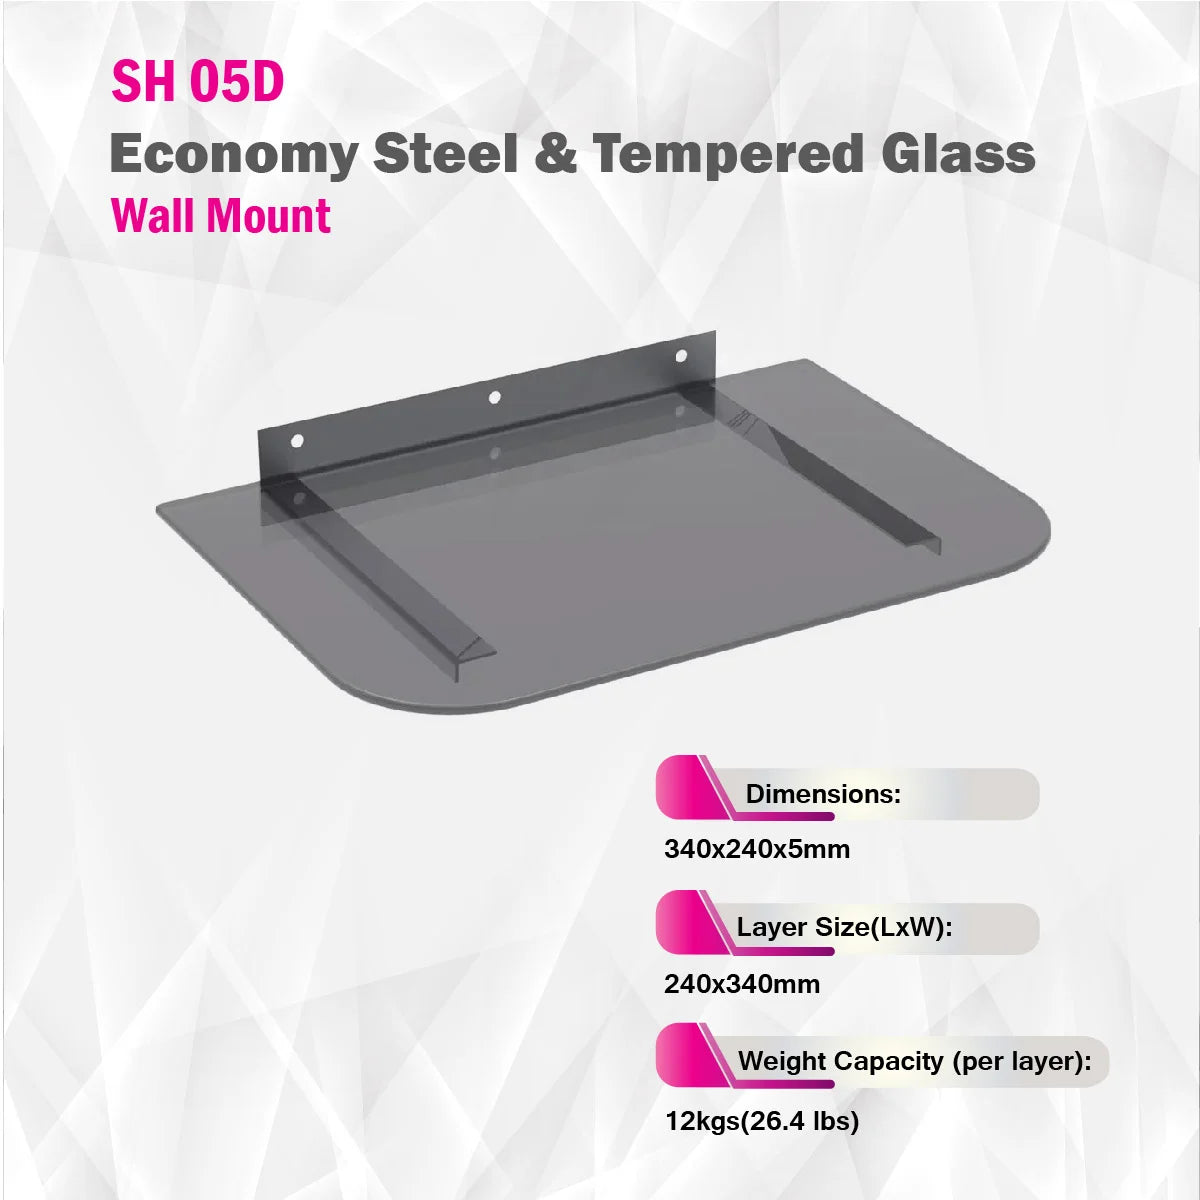 Skill Tech SH 05D - Economy Steel & Tempered Glass Wall Mount